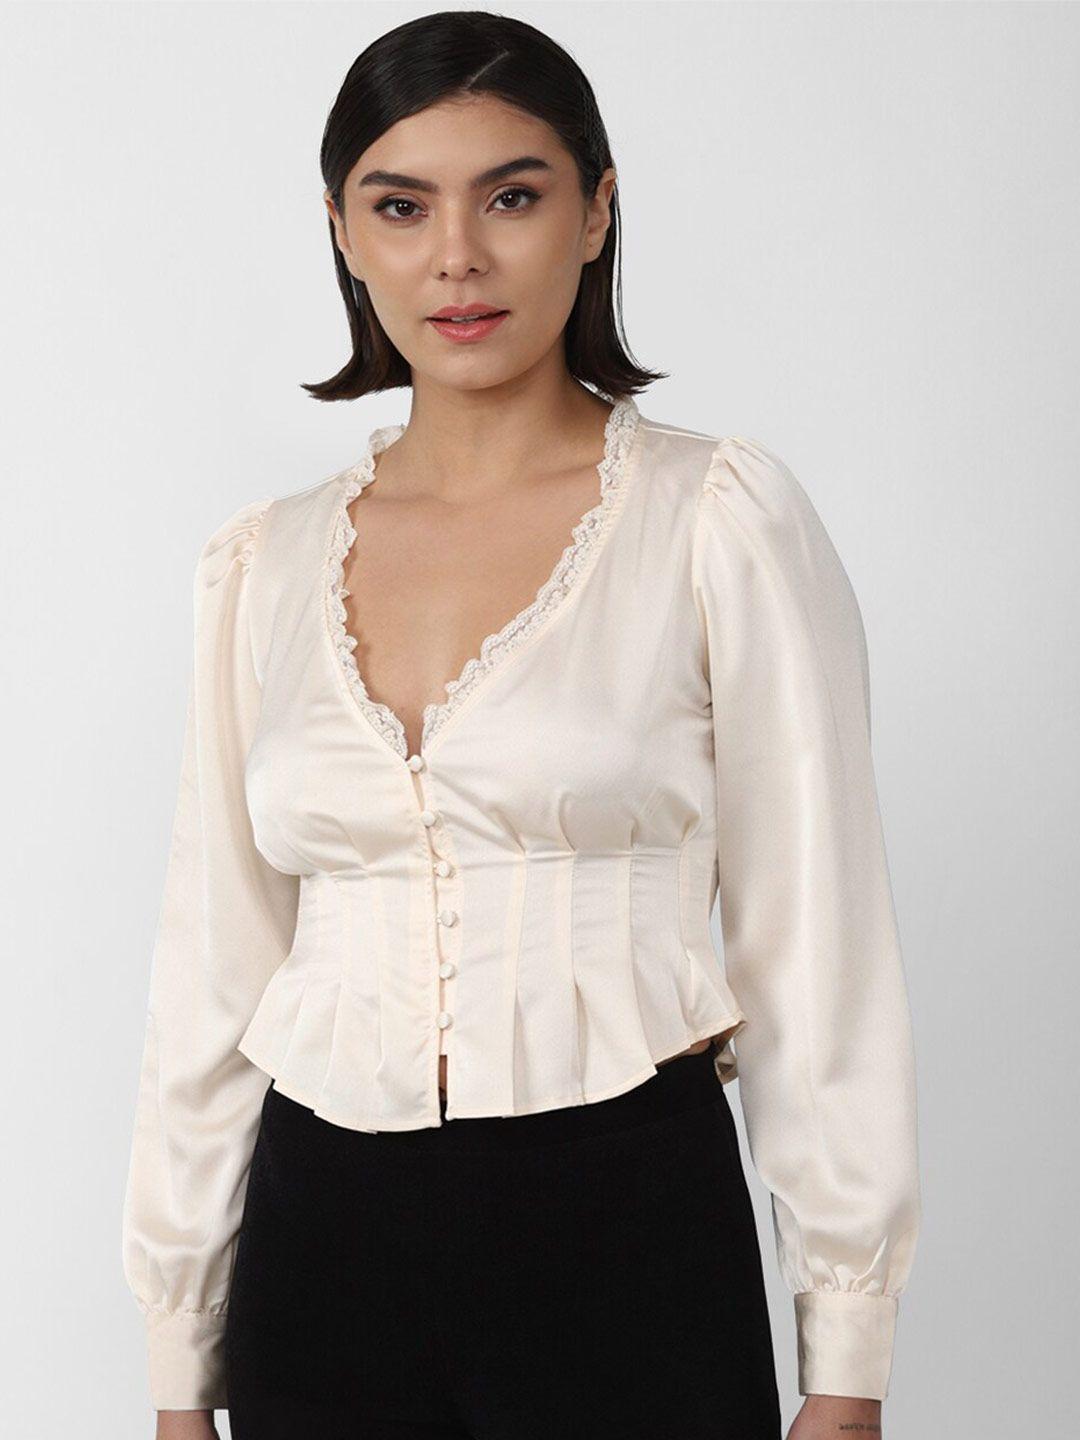 forever 21 cream-coloured shirt style top